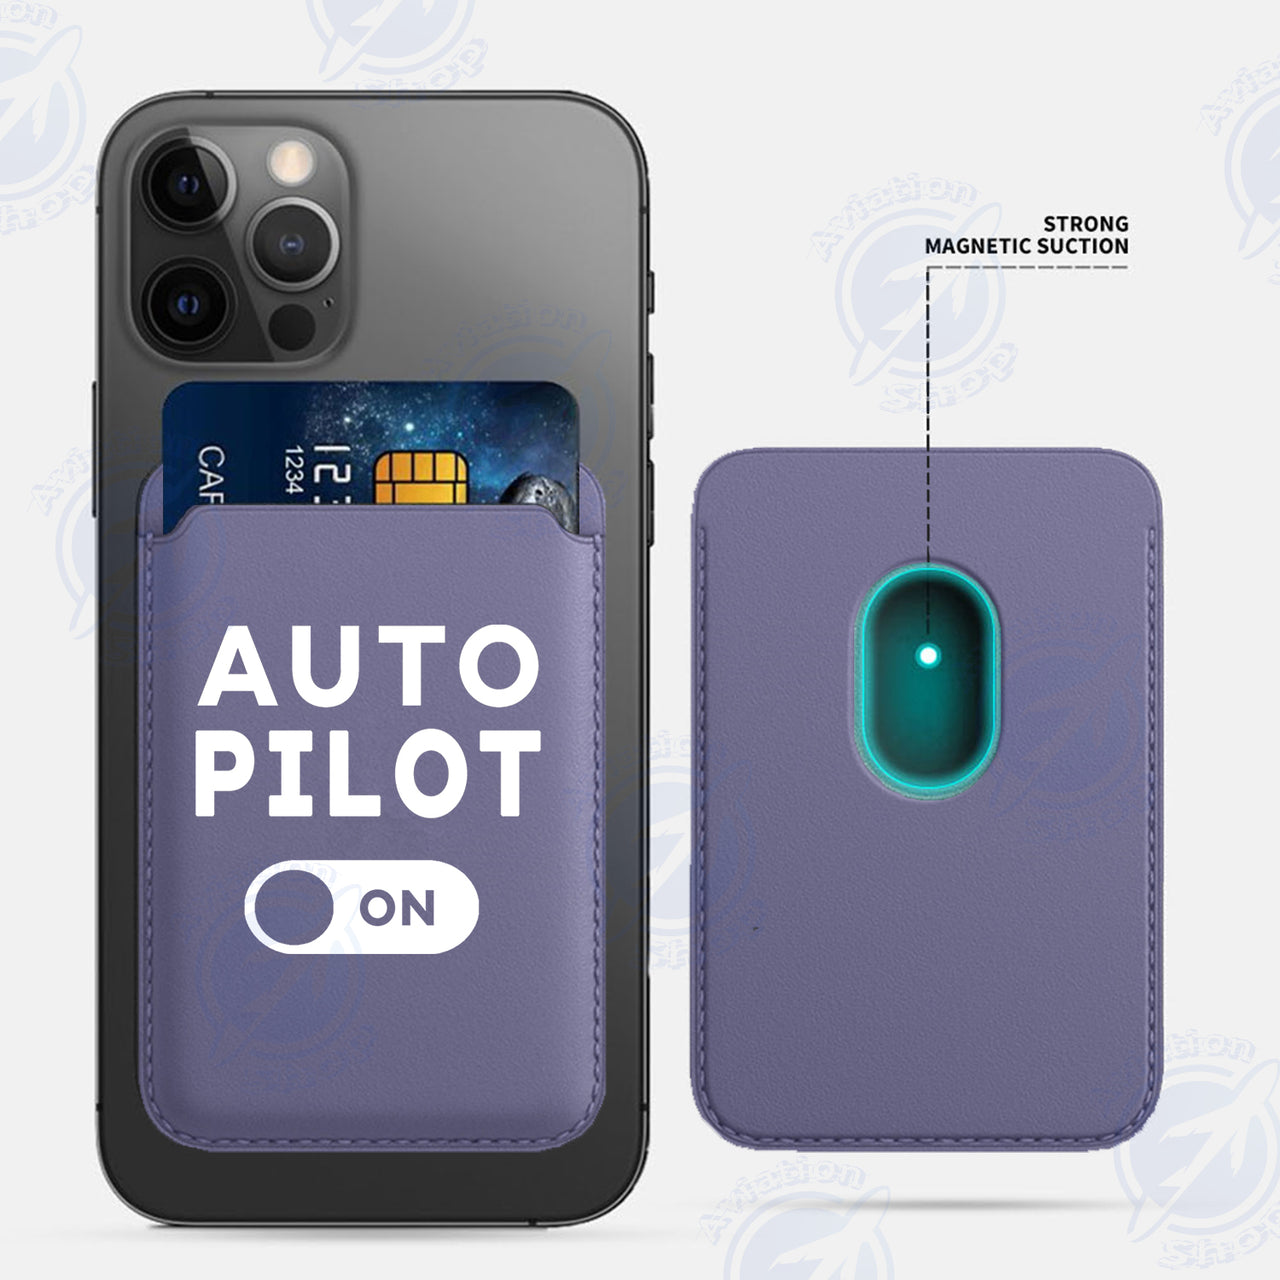 Auto Pilot ON iPhone Cases Magnetic Card Wallet